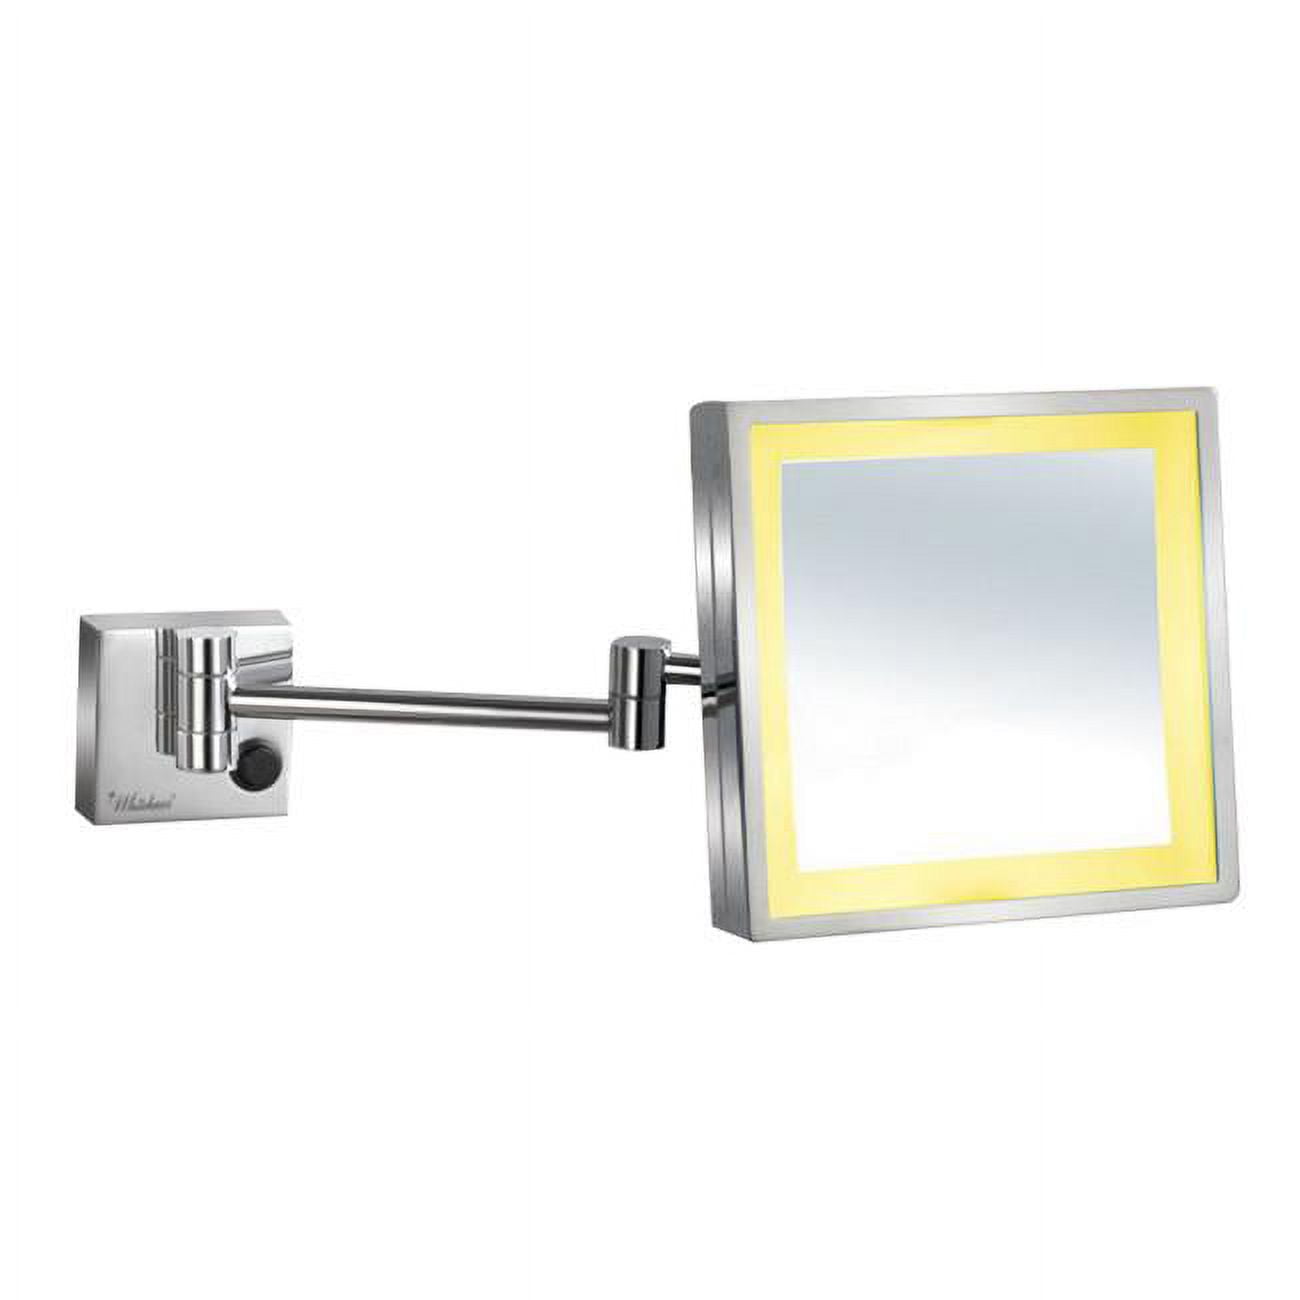 Whmr25-c Square Wall Mount Led 5x Magnified Mirror - Polished Chrome